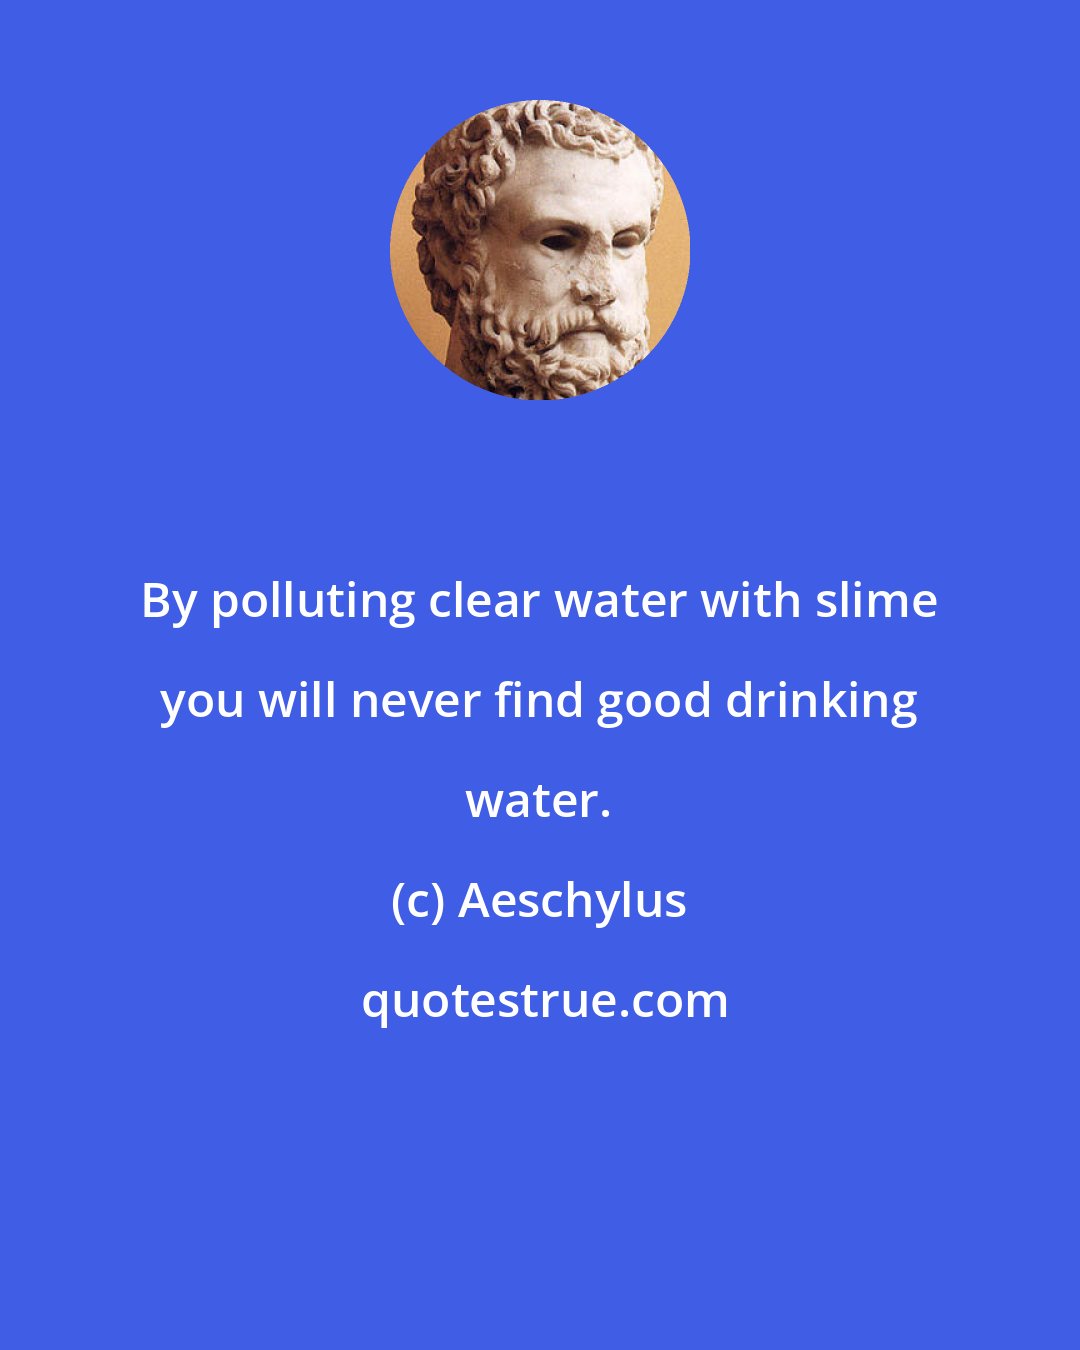 Aeschylus: By polluting clear water with slime you will never find good drinking water.